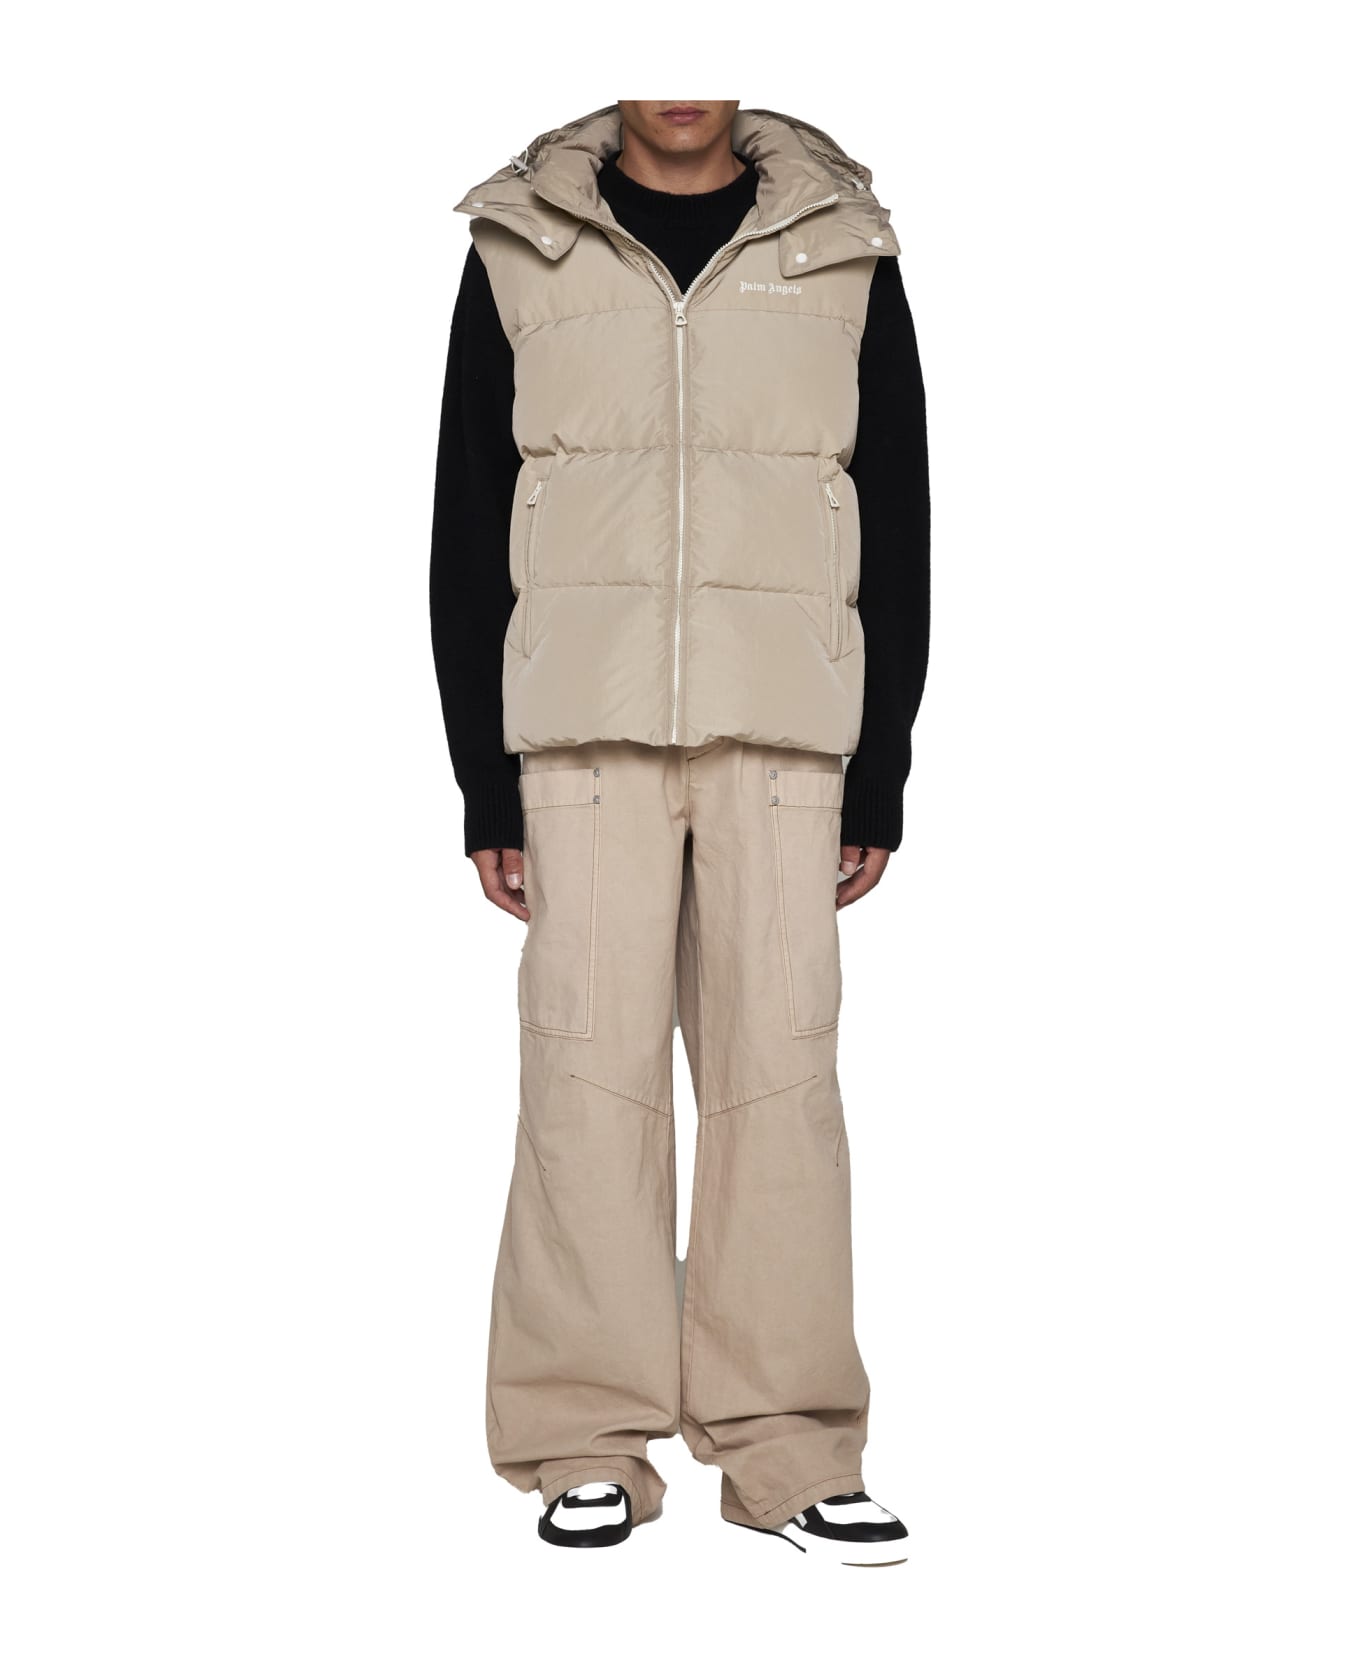 Palm Angels Cotton Cargo Pants - Beige ボトムス